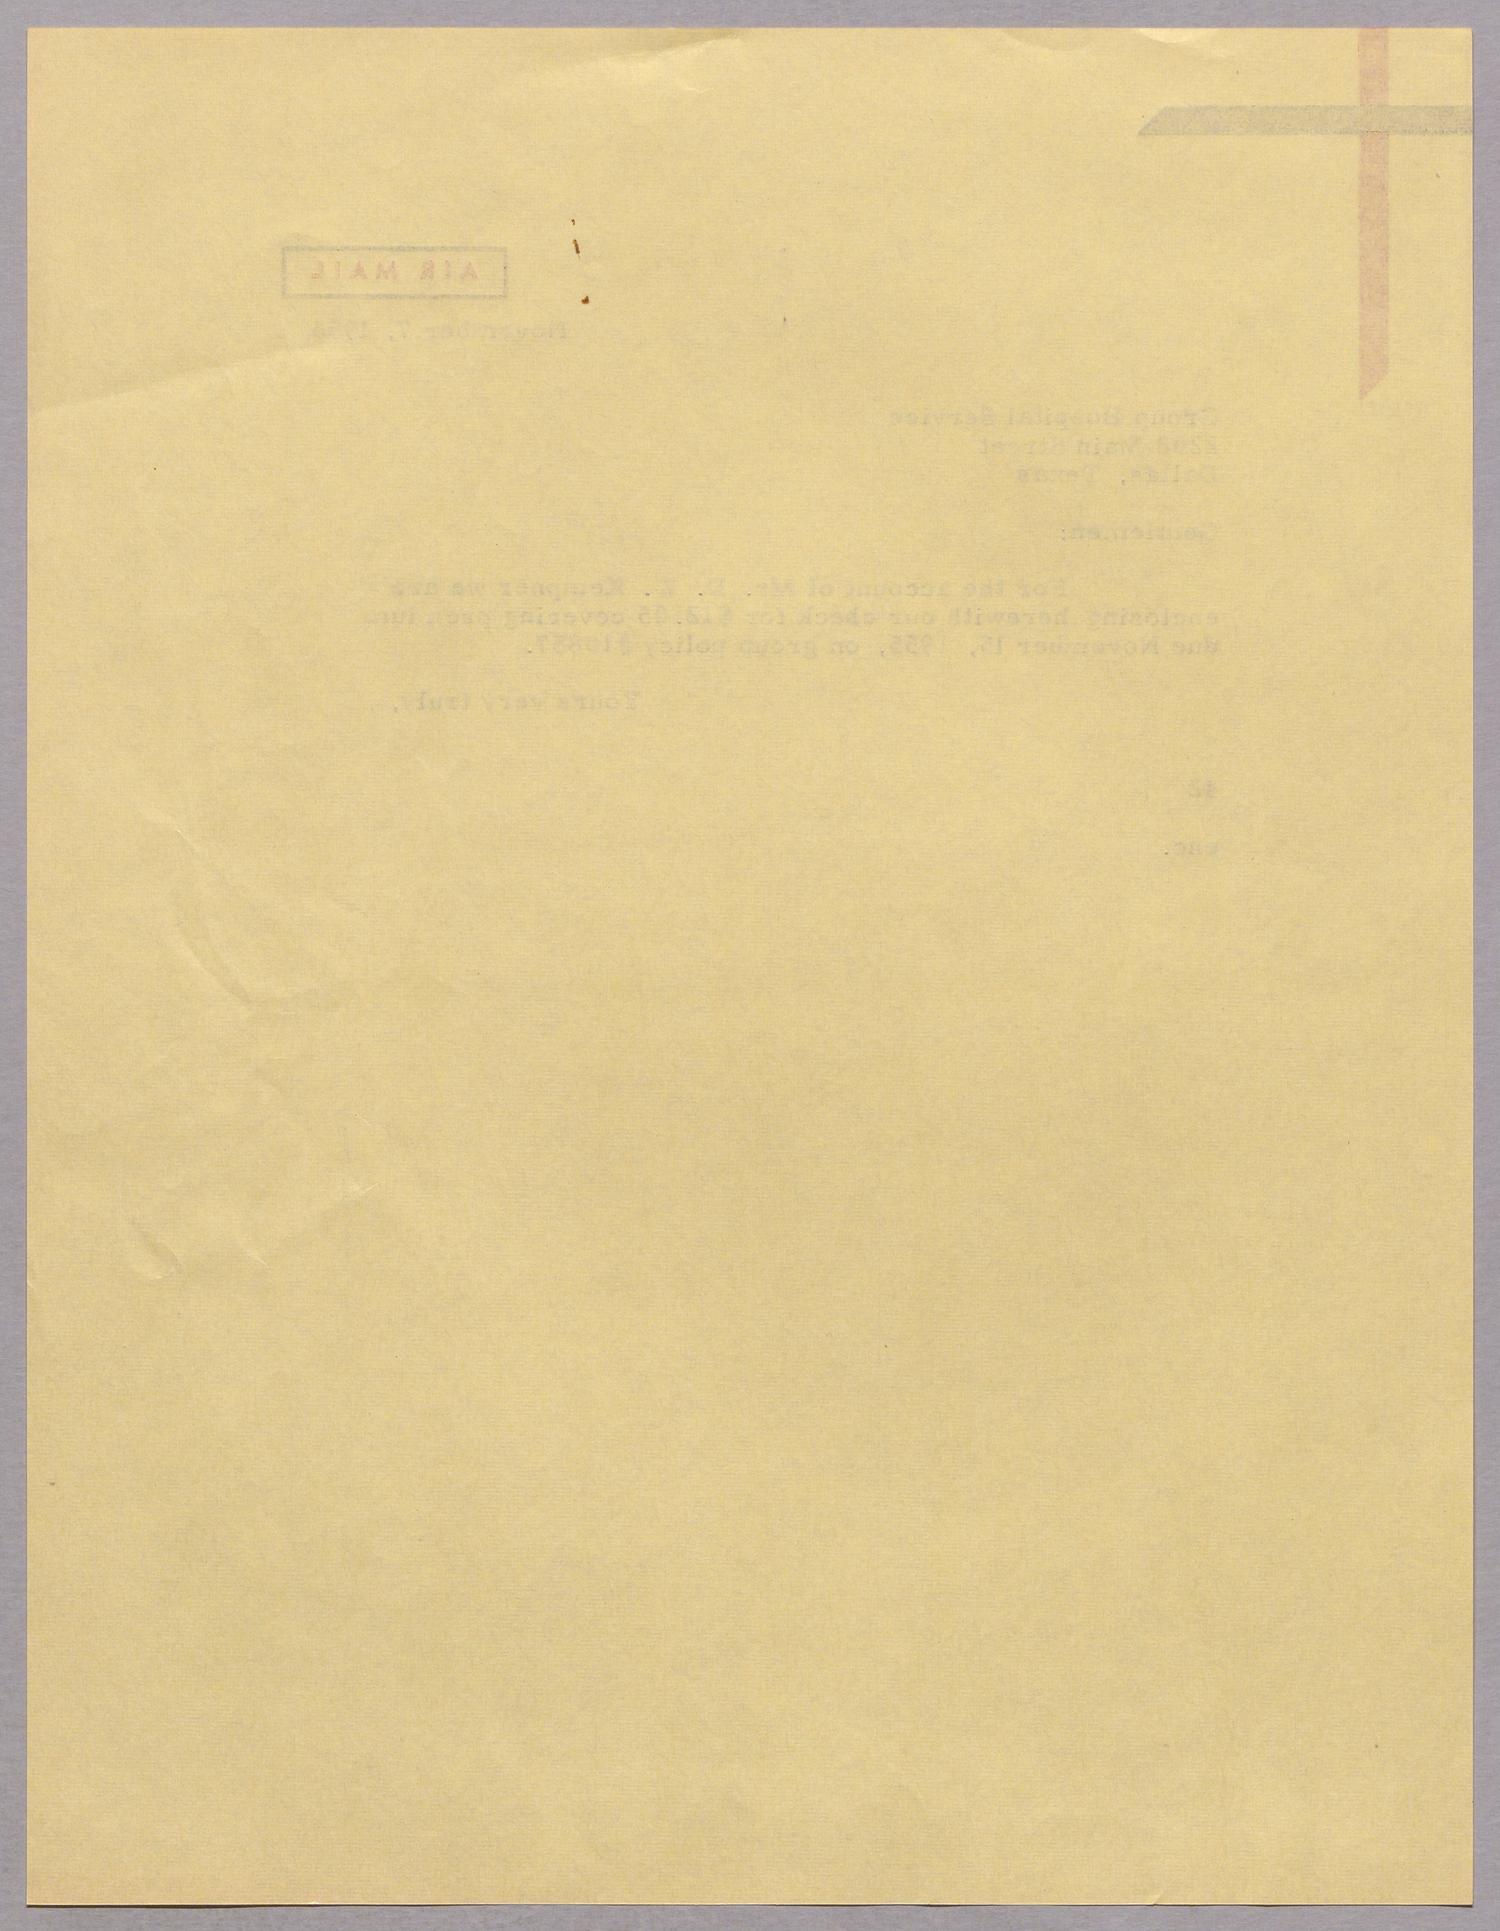 [Letter from A. H. Blackshear, Jr. to Group Hospital Service, November 7, 1955]
                                                
                                                    [Sequence #]: 2 of 2
                                                